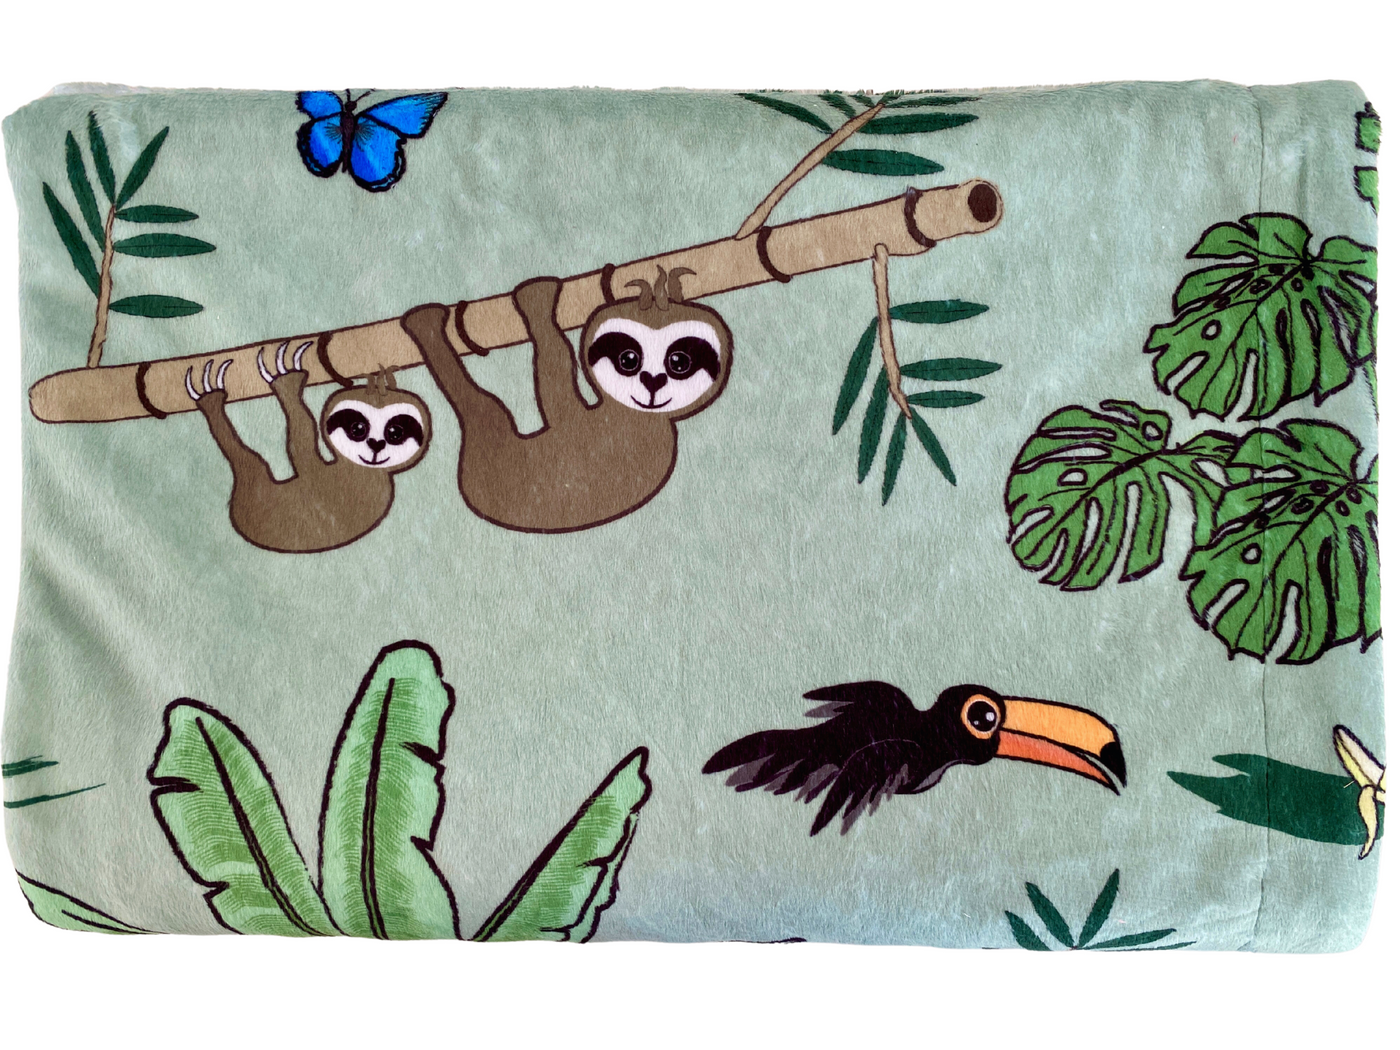 Giant blanket: Sloths in the Jungle